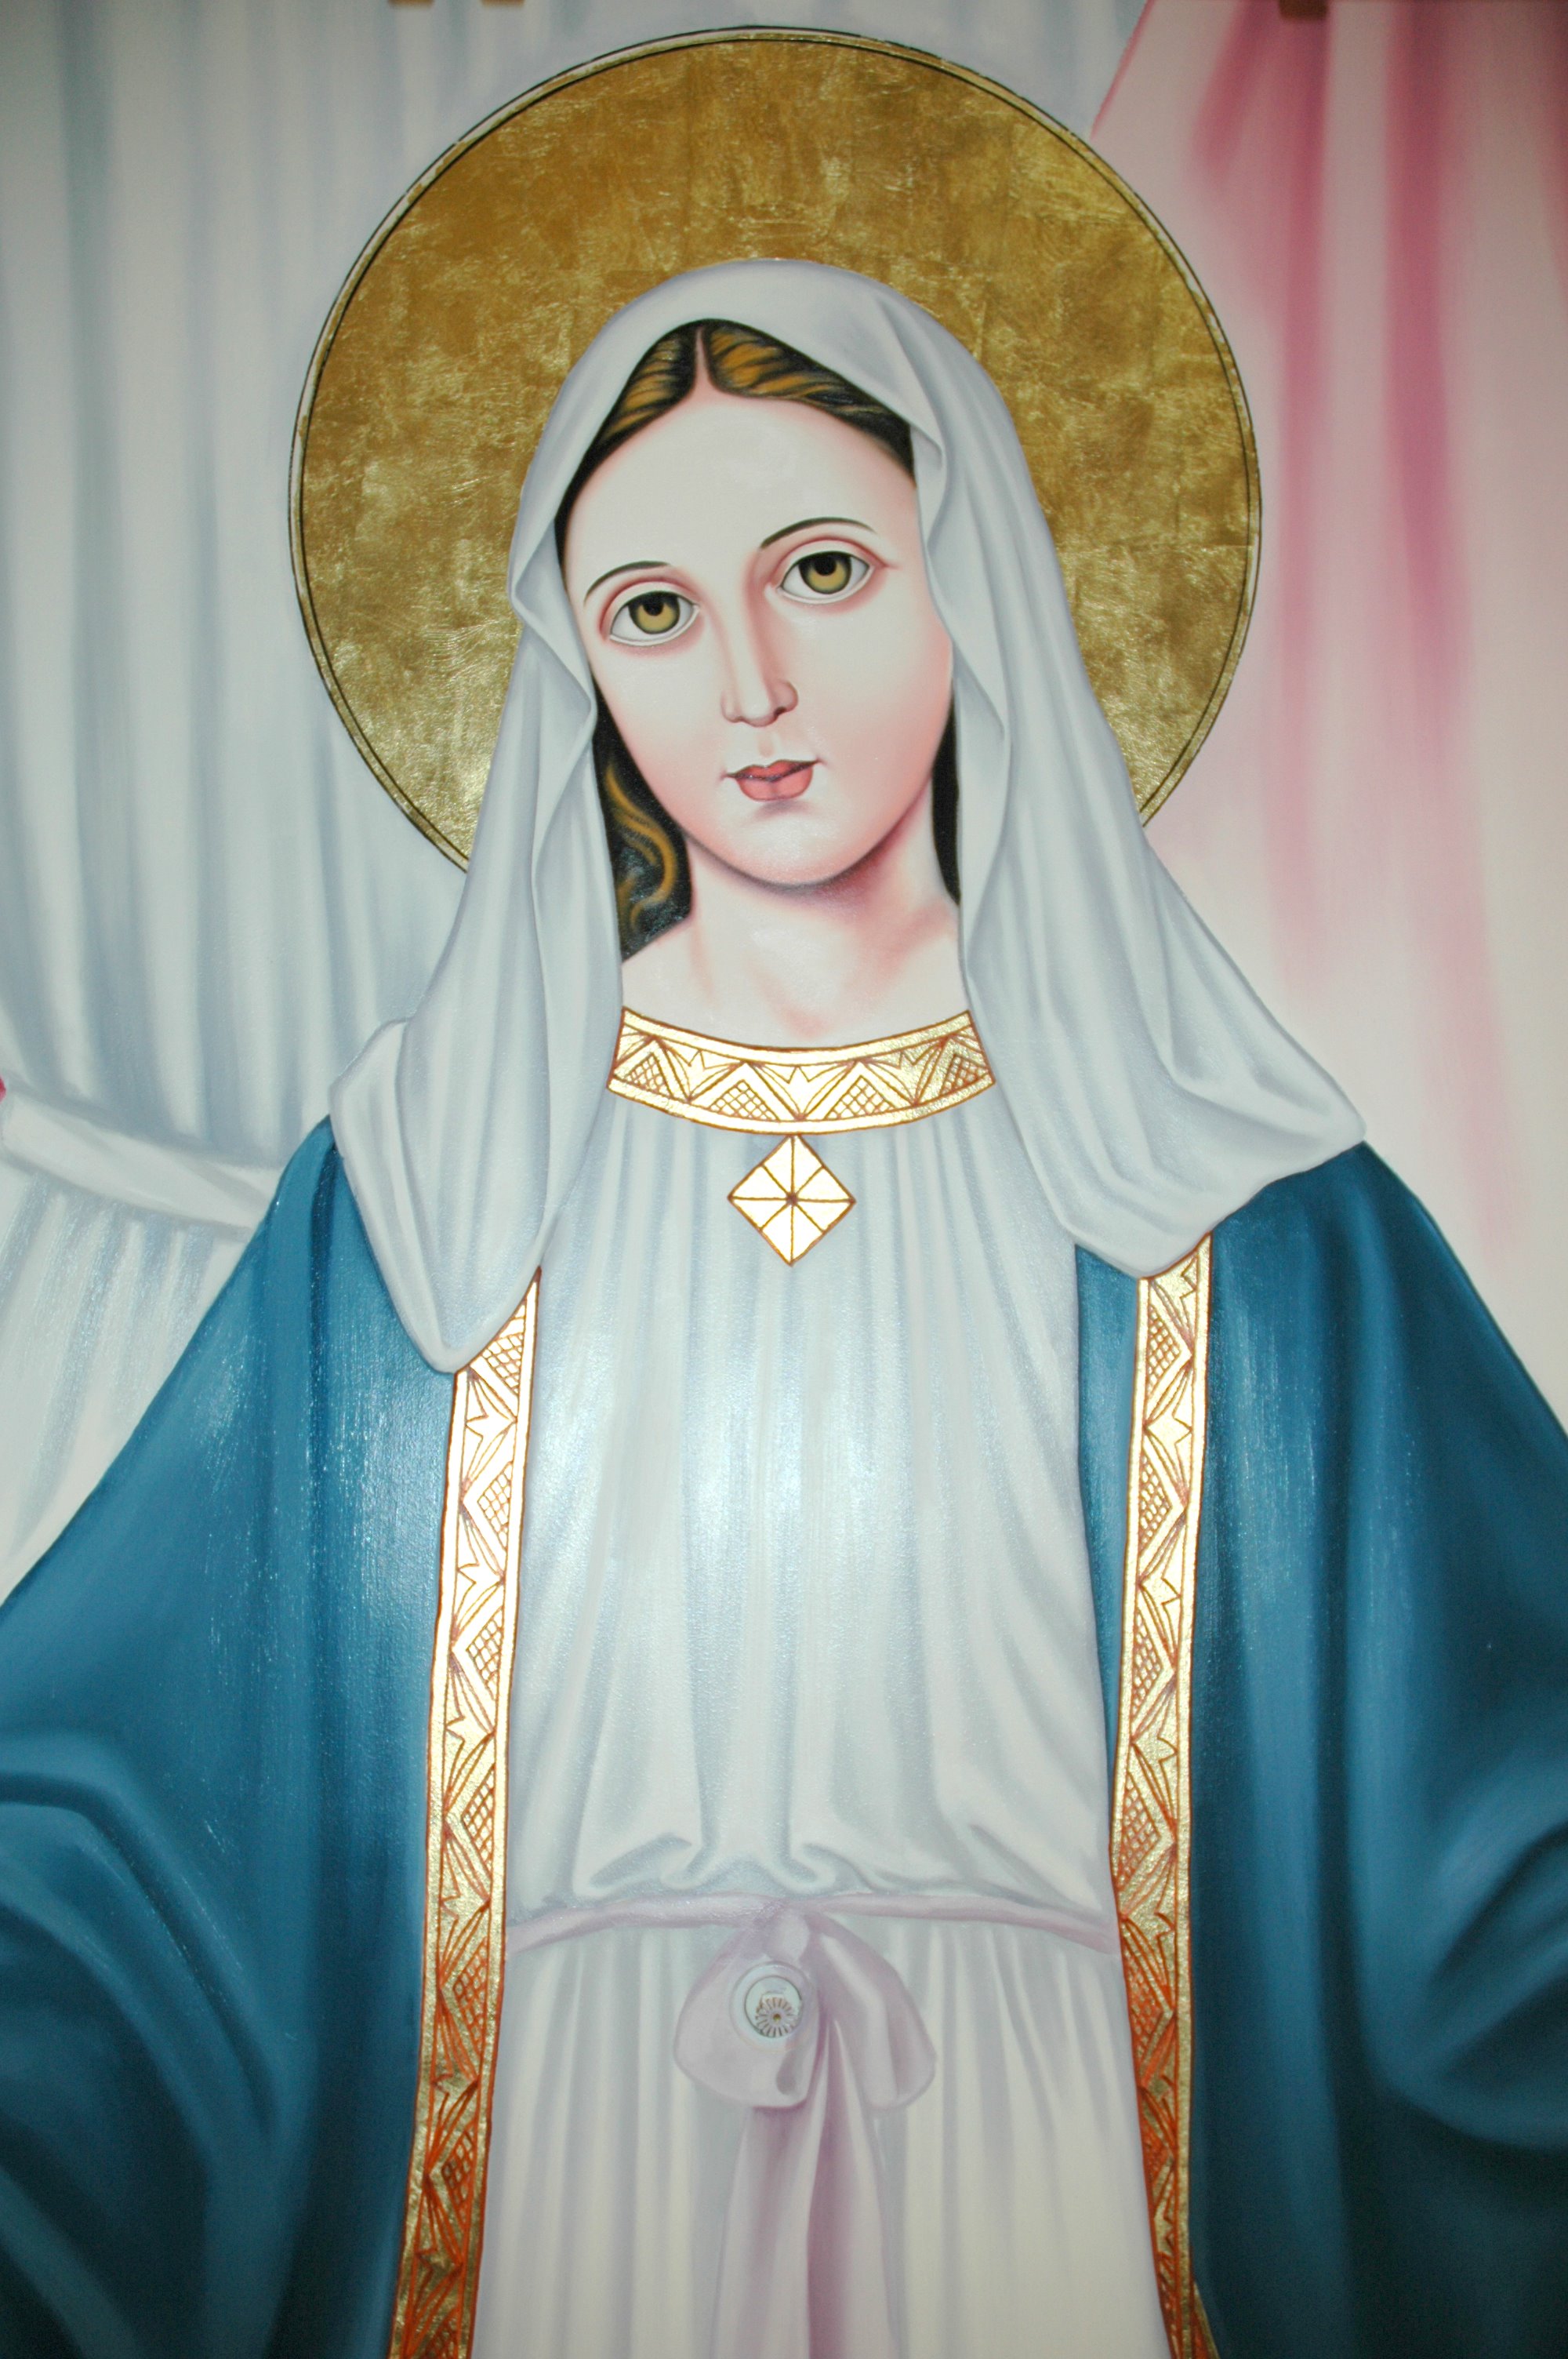 Mary s mother is. Saint Mary.